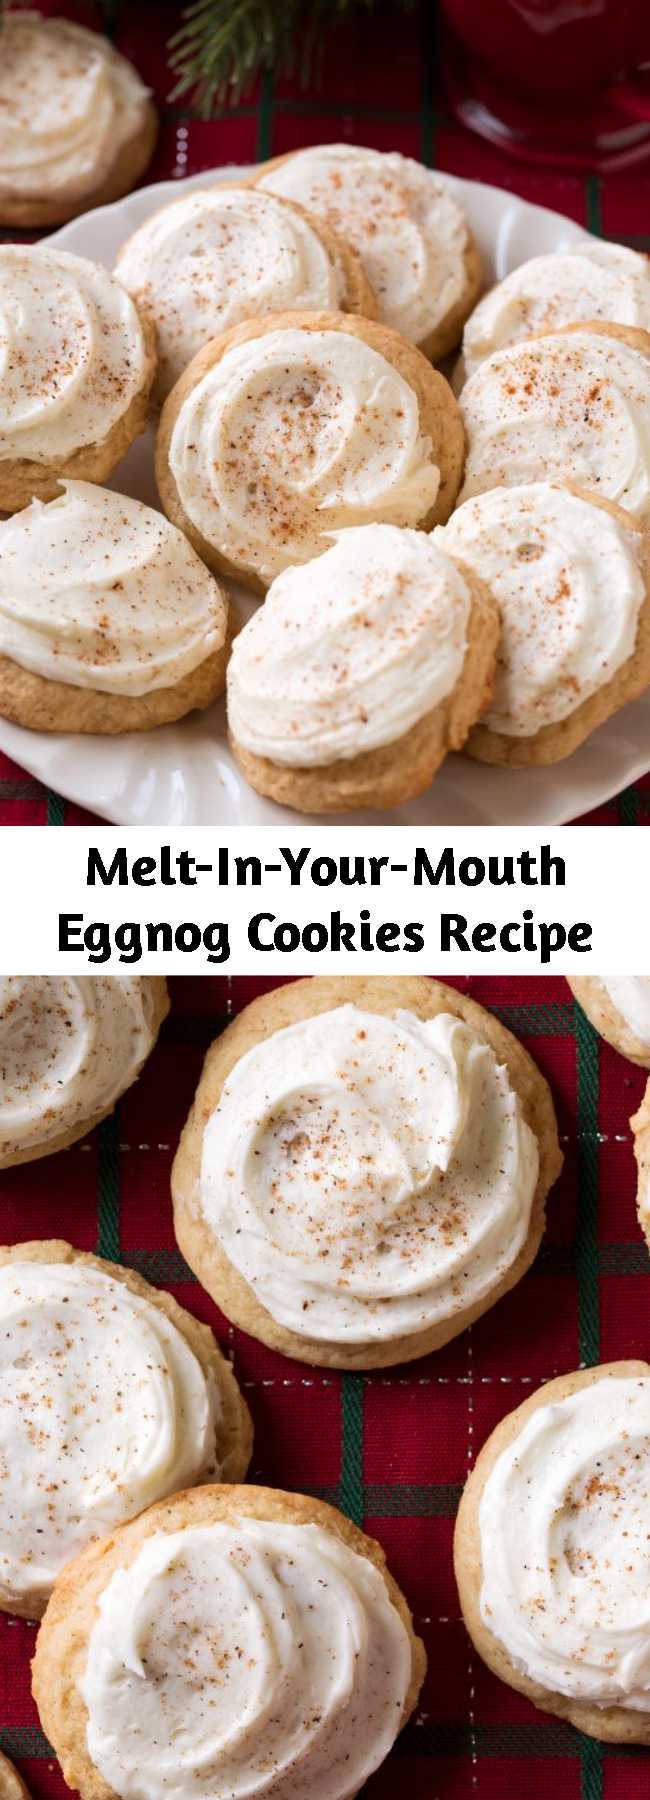 Melt-In-Your-Mouth Eggnog Cookies Recipe - With their tender cake-like texture and generous coating of eggnog frosting they are likely to become a new favorite holiday cookie! Once you try them you’ll want to make them at least once every Christmas season. They’re a soft and fluffy, cake-like cookie with a deliciously tender texture, the perfect amount of spice, and a rich eggnog frosting.